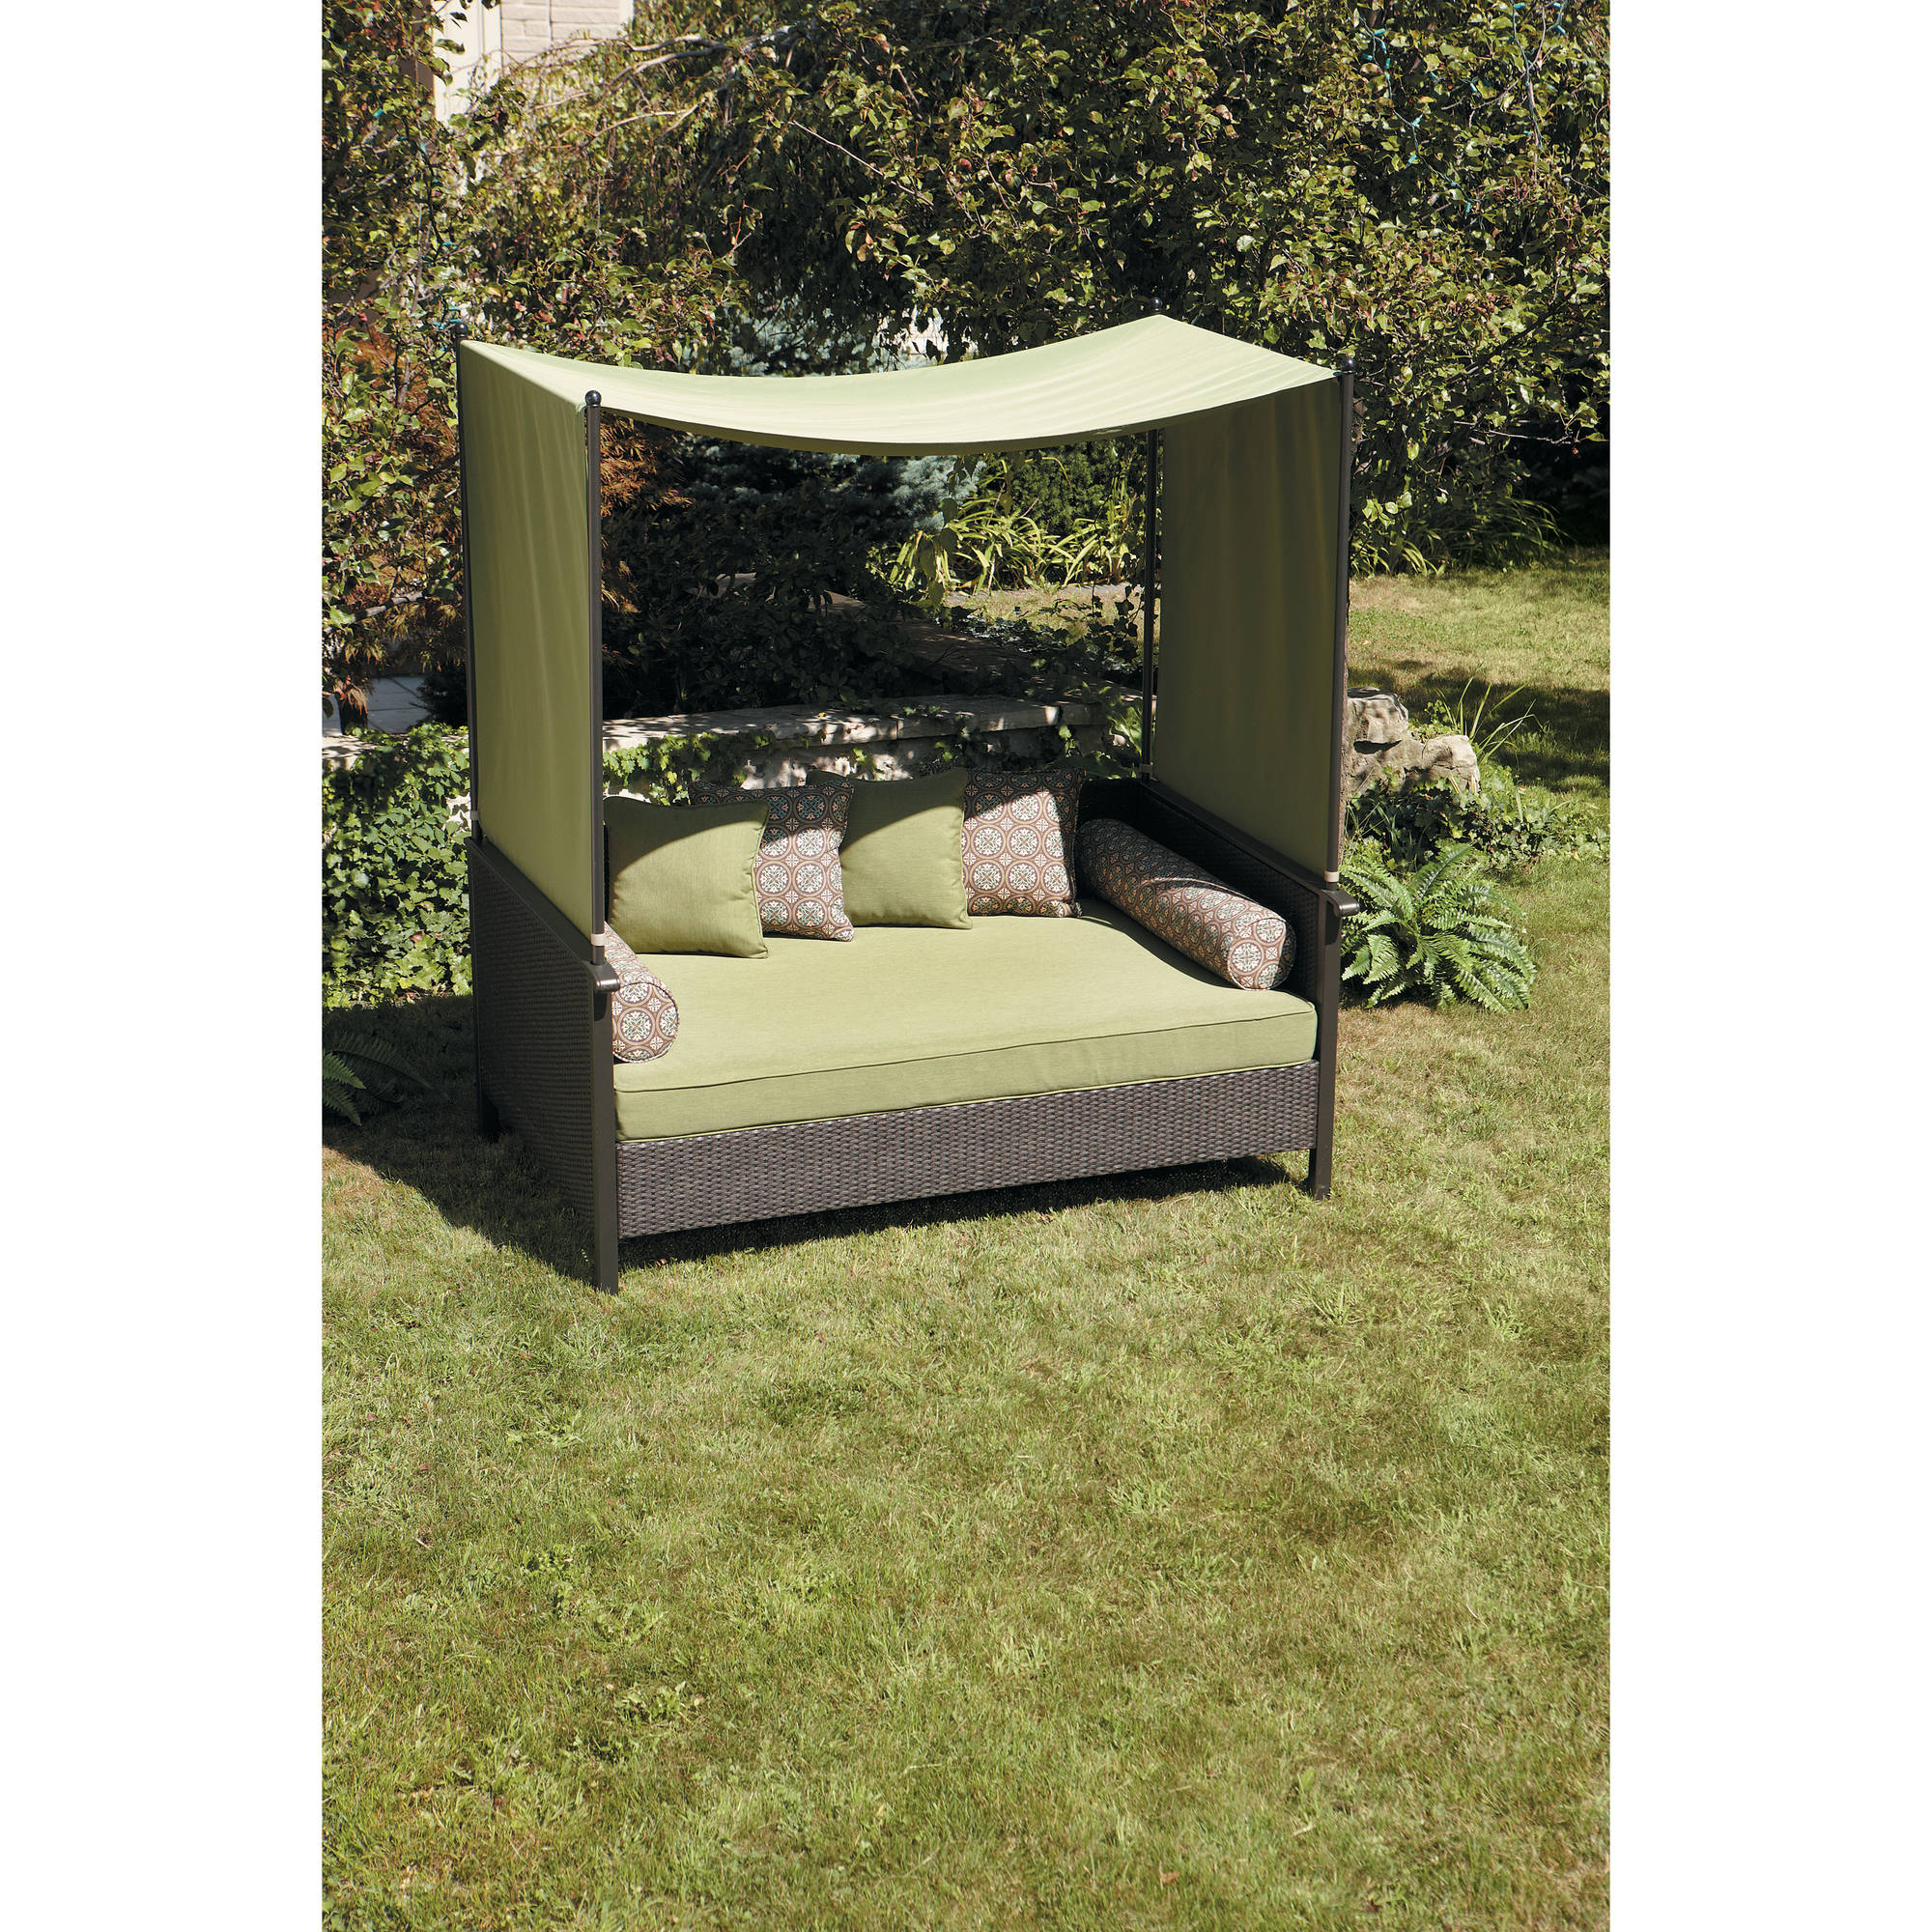 Better Homes & Gardens Providence Outdoor Daybed with Canopy, Green - image 3 of 10